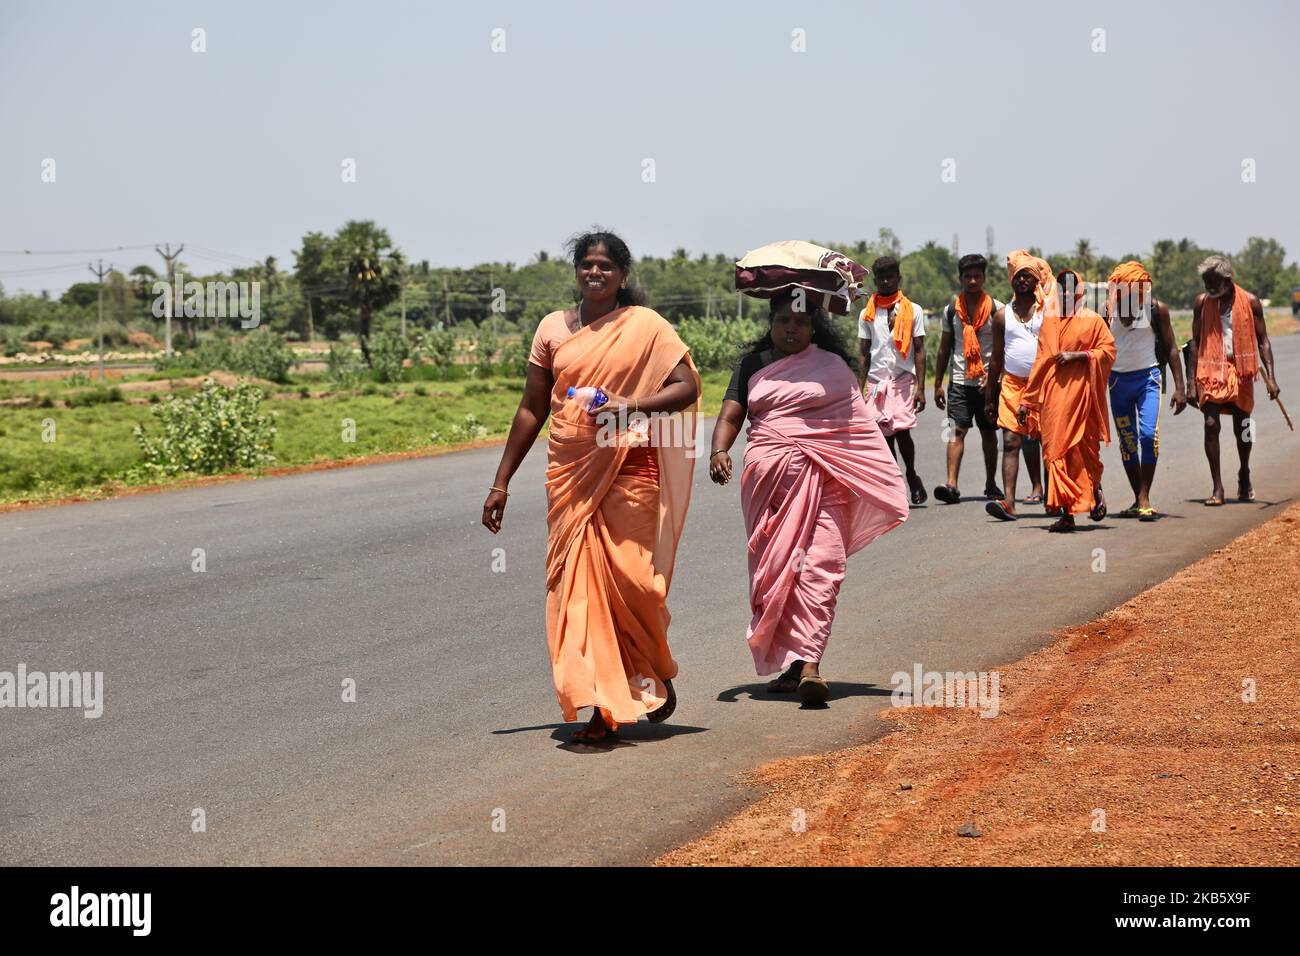 Thousands of Indian Catholics embark on the pilgrimage and walk to the Annai Velankanni Church (Basilica of Our Lady of Good Health) in Velankanni, Tamil Nadu, India to celebrate the 11-day annual feast of Our Lady of Health, popularly called 'Annai Velankanni Matha' and the 'Lourdes of the East'. The pilgrims walk for 17 days travelling over 20km to reach the church for the annual festival. (Photo by Creative Touch Imaging Ltd./NurPhoto) Stock Photo